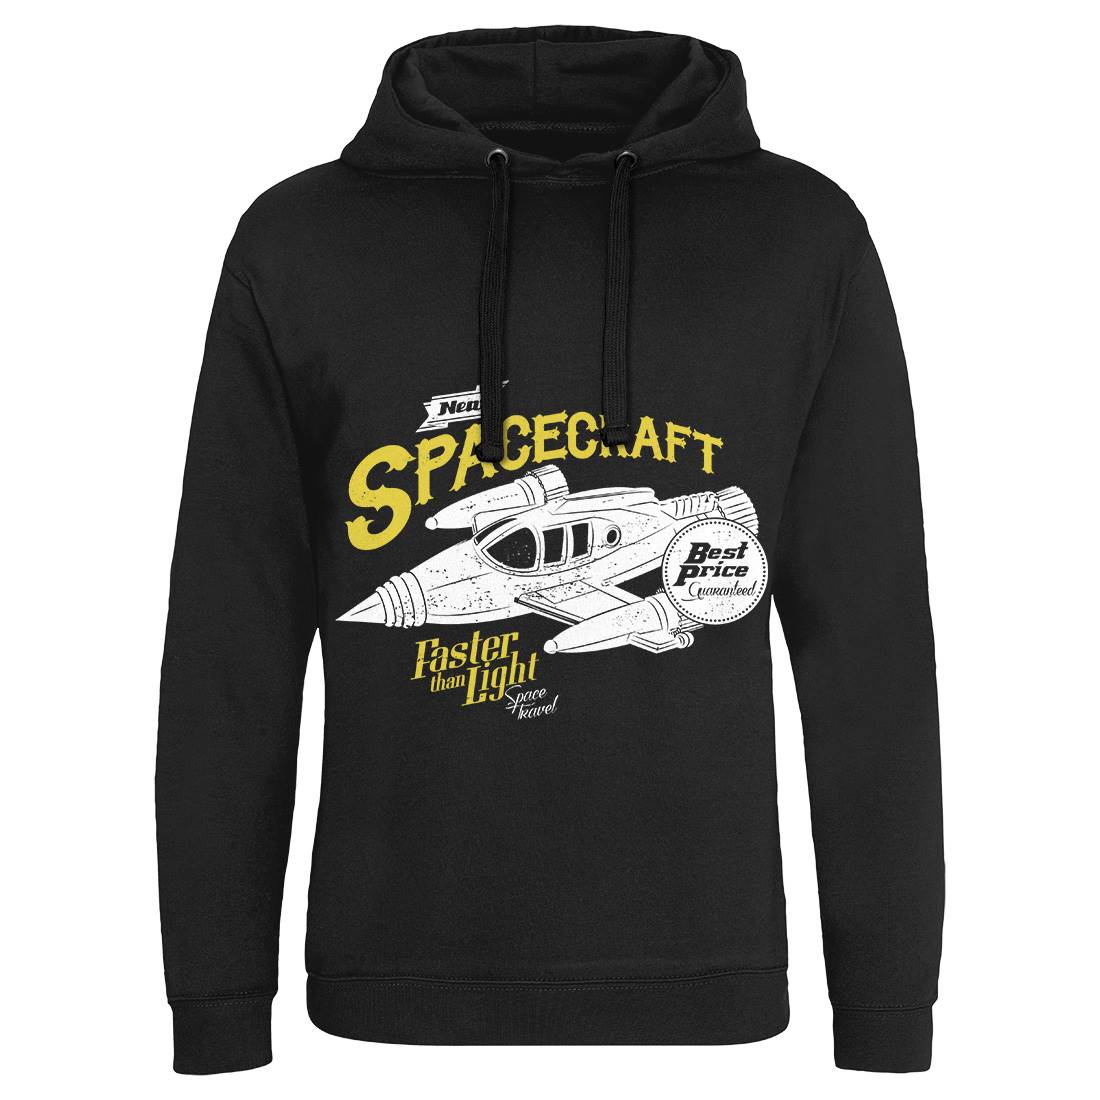 Spacecraft Mens Hoodie Without Pocket Space A958